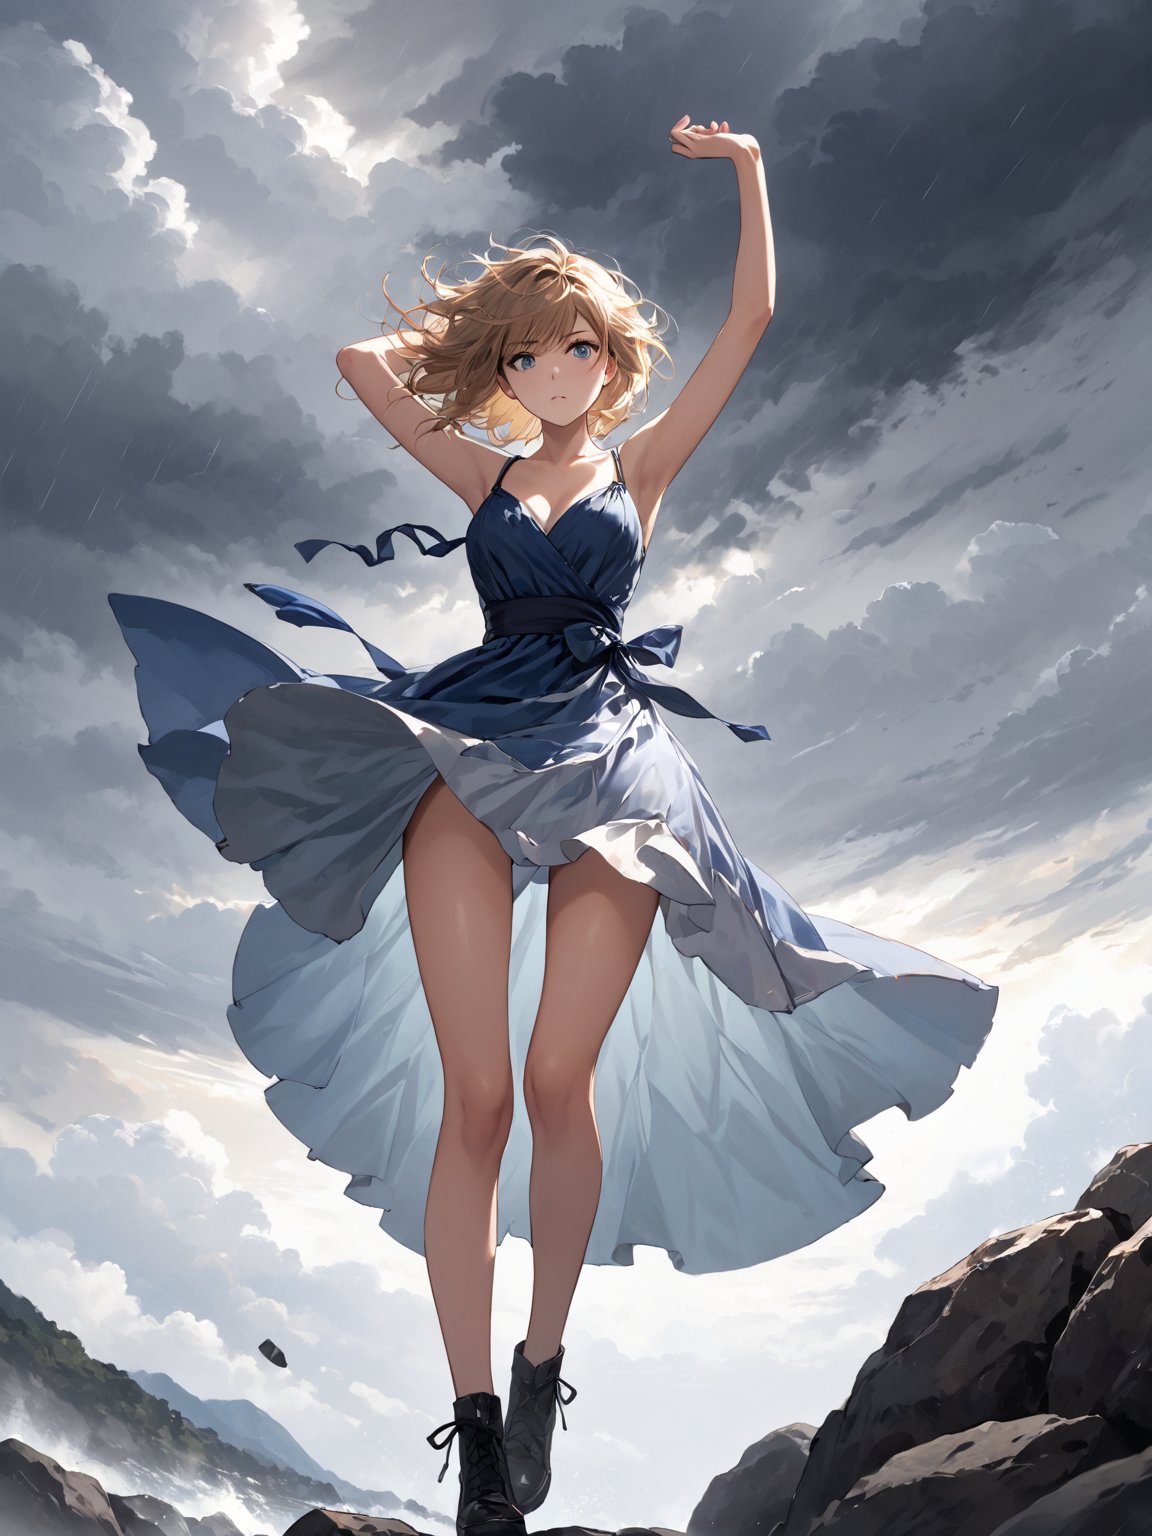 score_9,score_8_up,score_7_up,score_6_up, masterpiece, best quality, highres
,//Character, 
1girl, solo,SakayanagiArisu
,//Fashion, 

,//Background, 
,//Others, ,Expressiveh,
The girl climbing a steep, rocky cliff face. Her dress is slightly torn, and her hair is windswept. She's reaching for a handhold, determination evident on her face. Dark storm clouds gather in the background, adding drama to the scene.